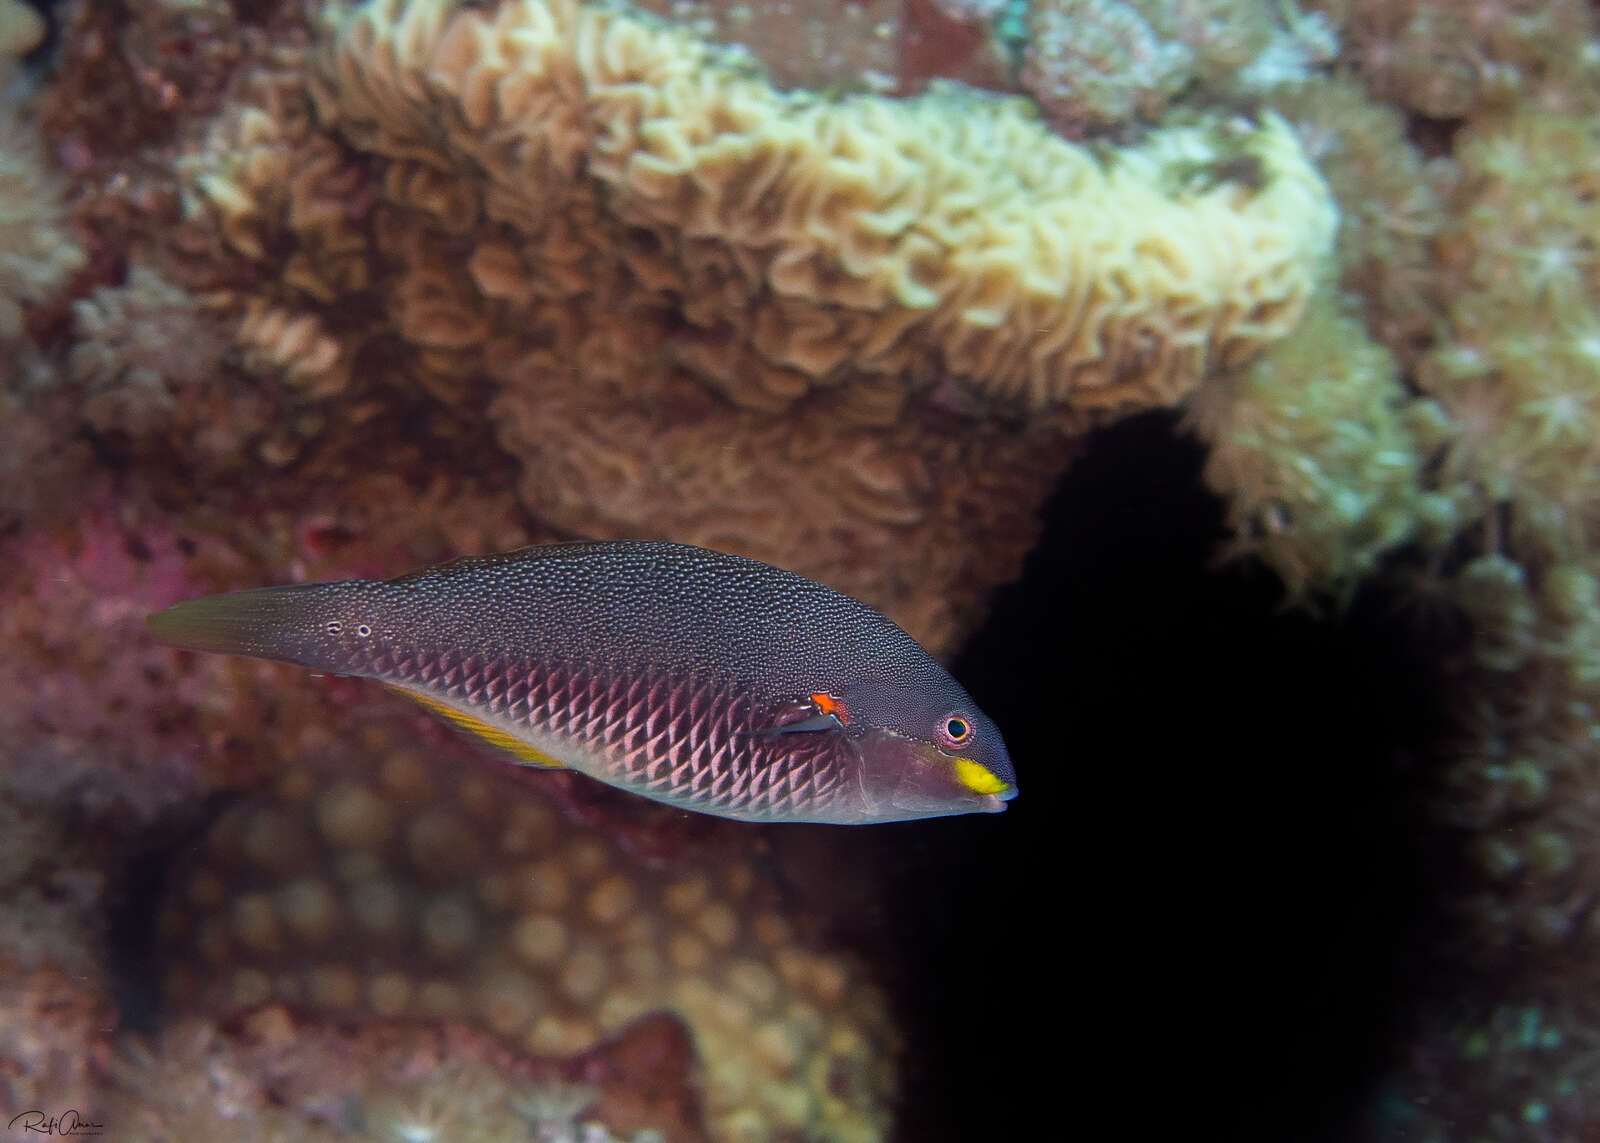 Image of Blue-lined wrasse